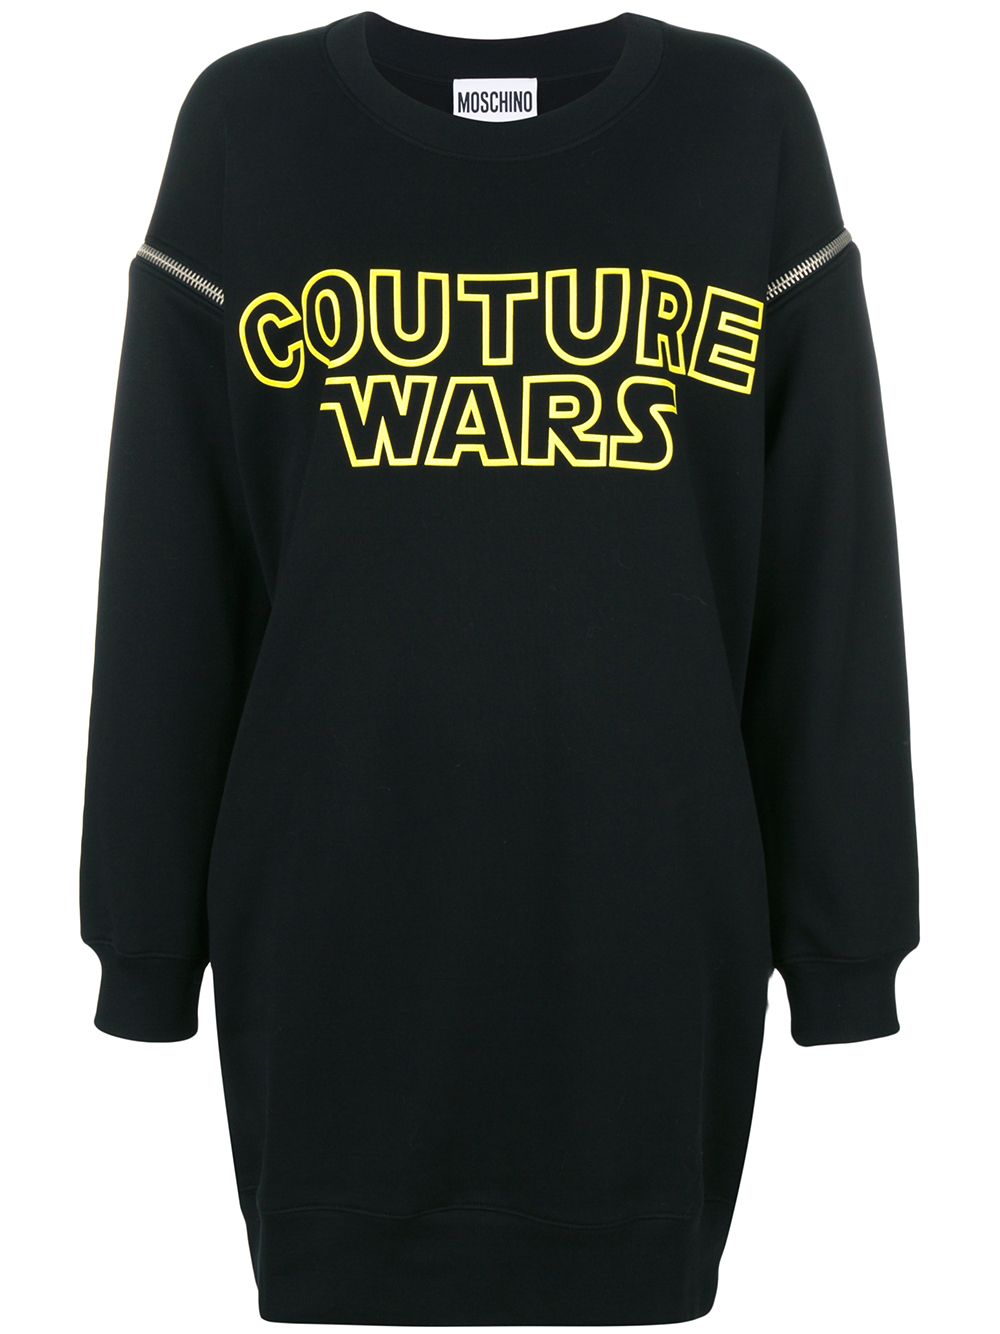 moschino couture wars